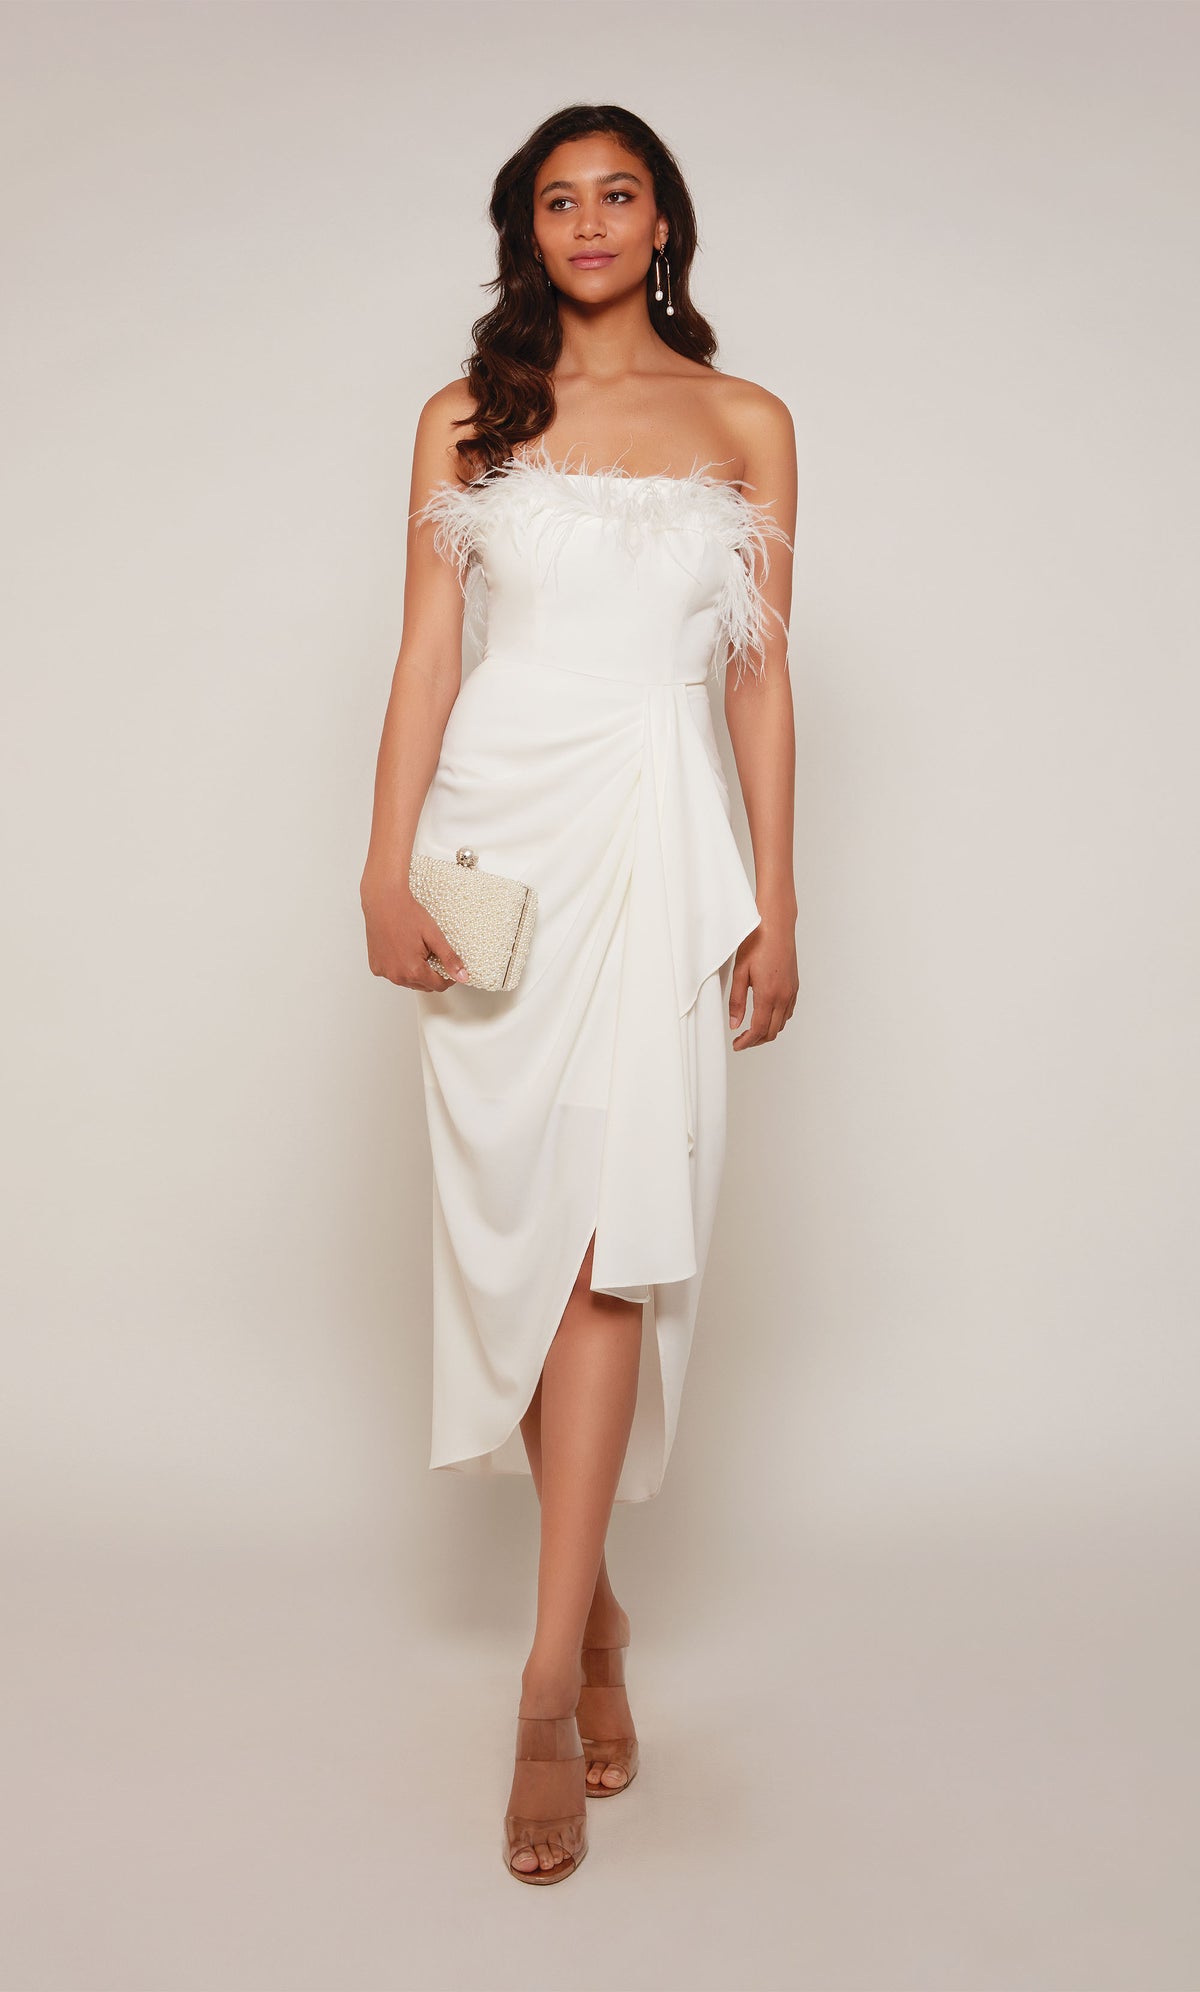 An ivory colored asymmetrical hemline dress  with a strapless neckline, feather trim, and a cascading drape in the front.